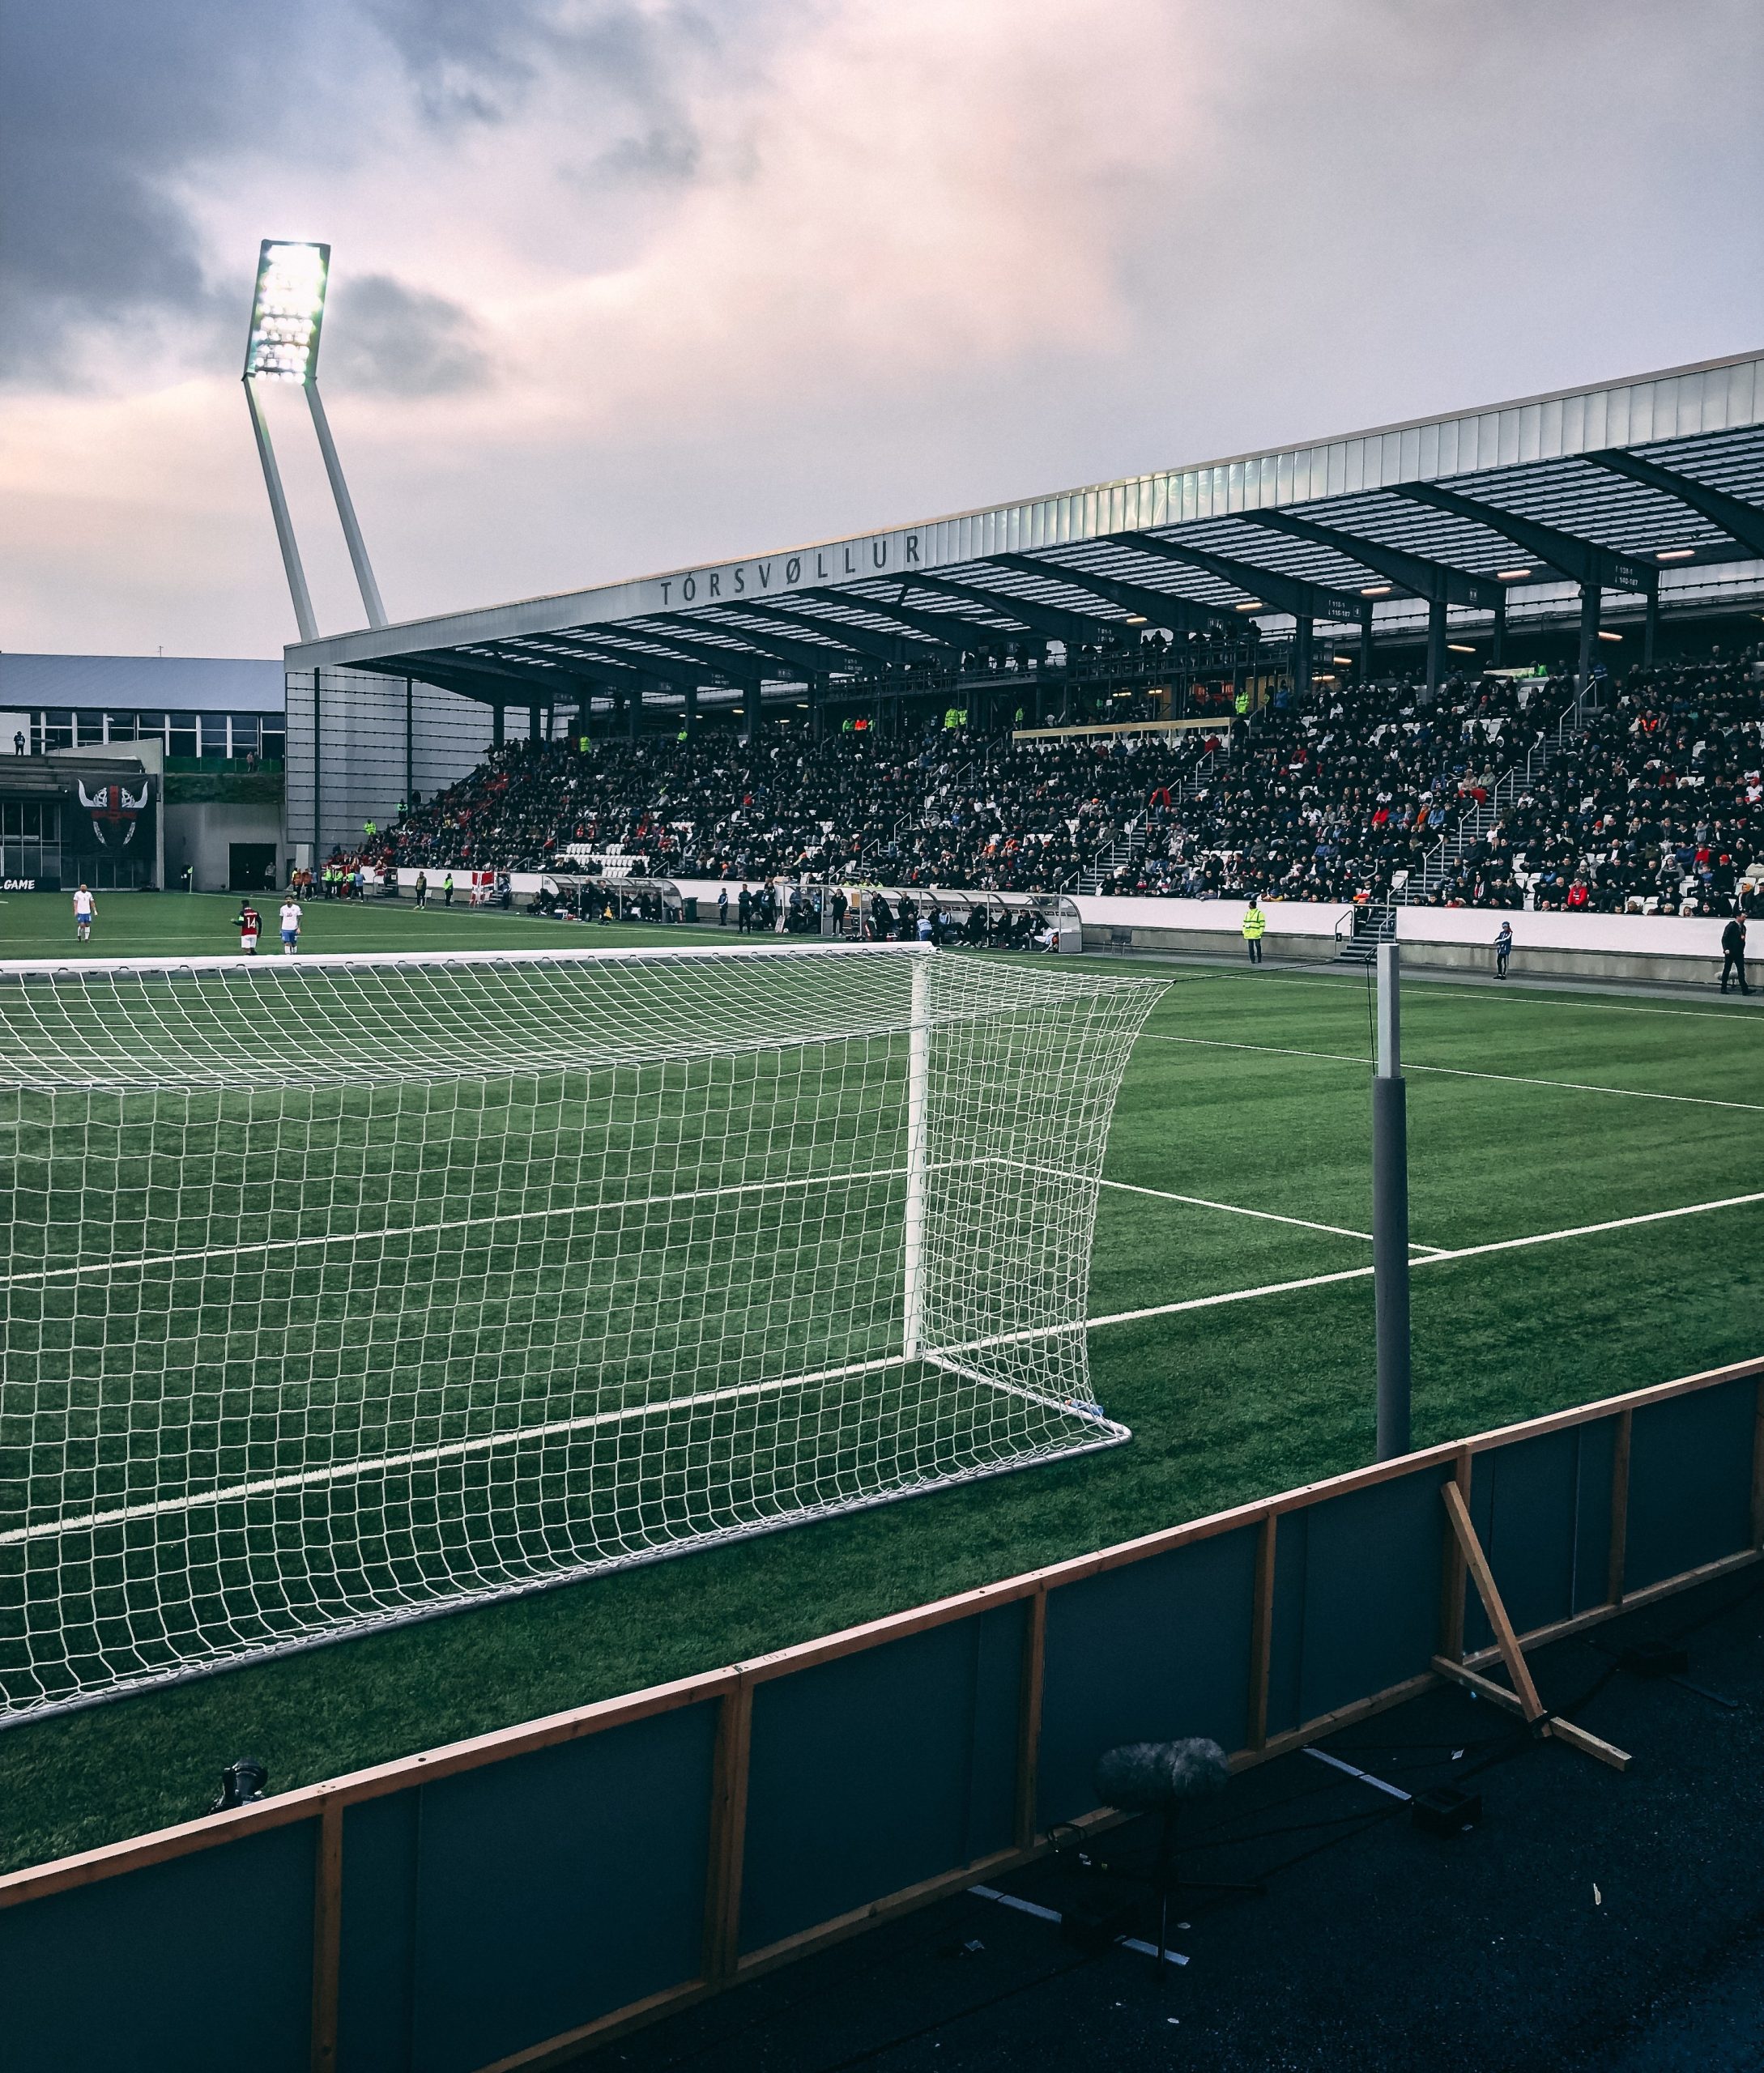 A vertical shot of crowded soccer stadium under cloudy sky